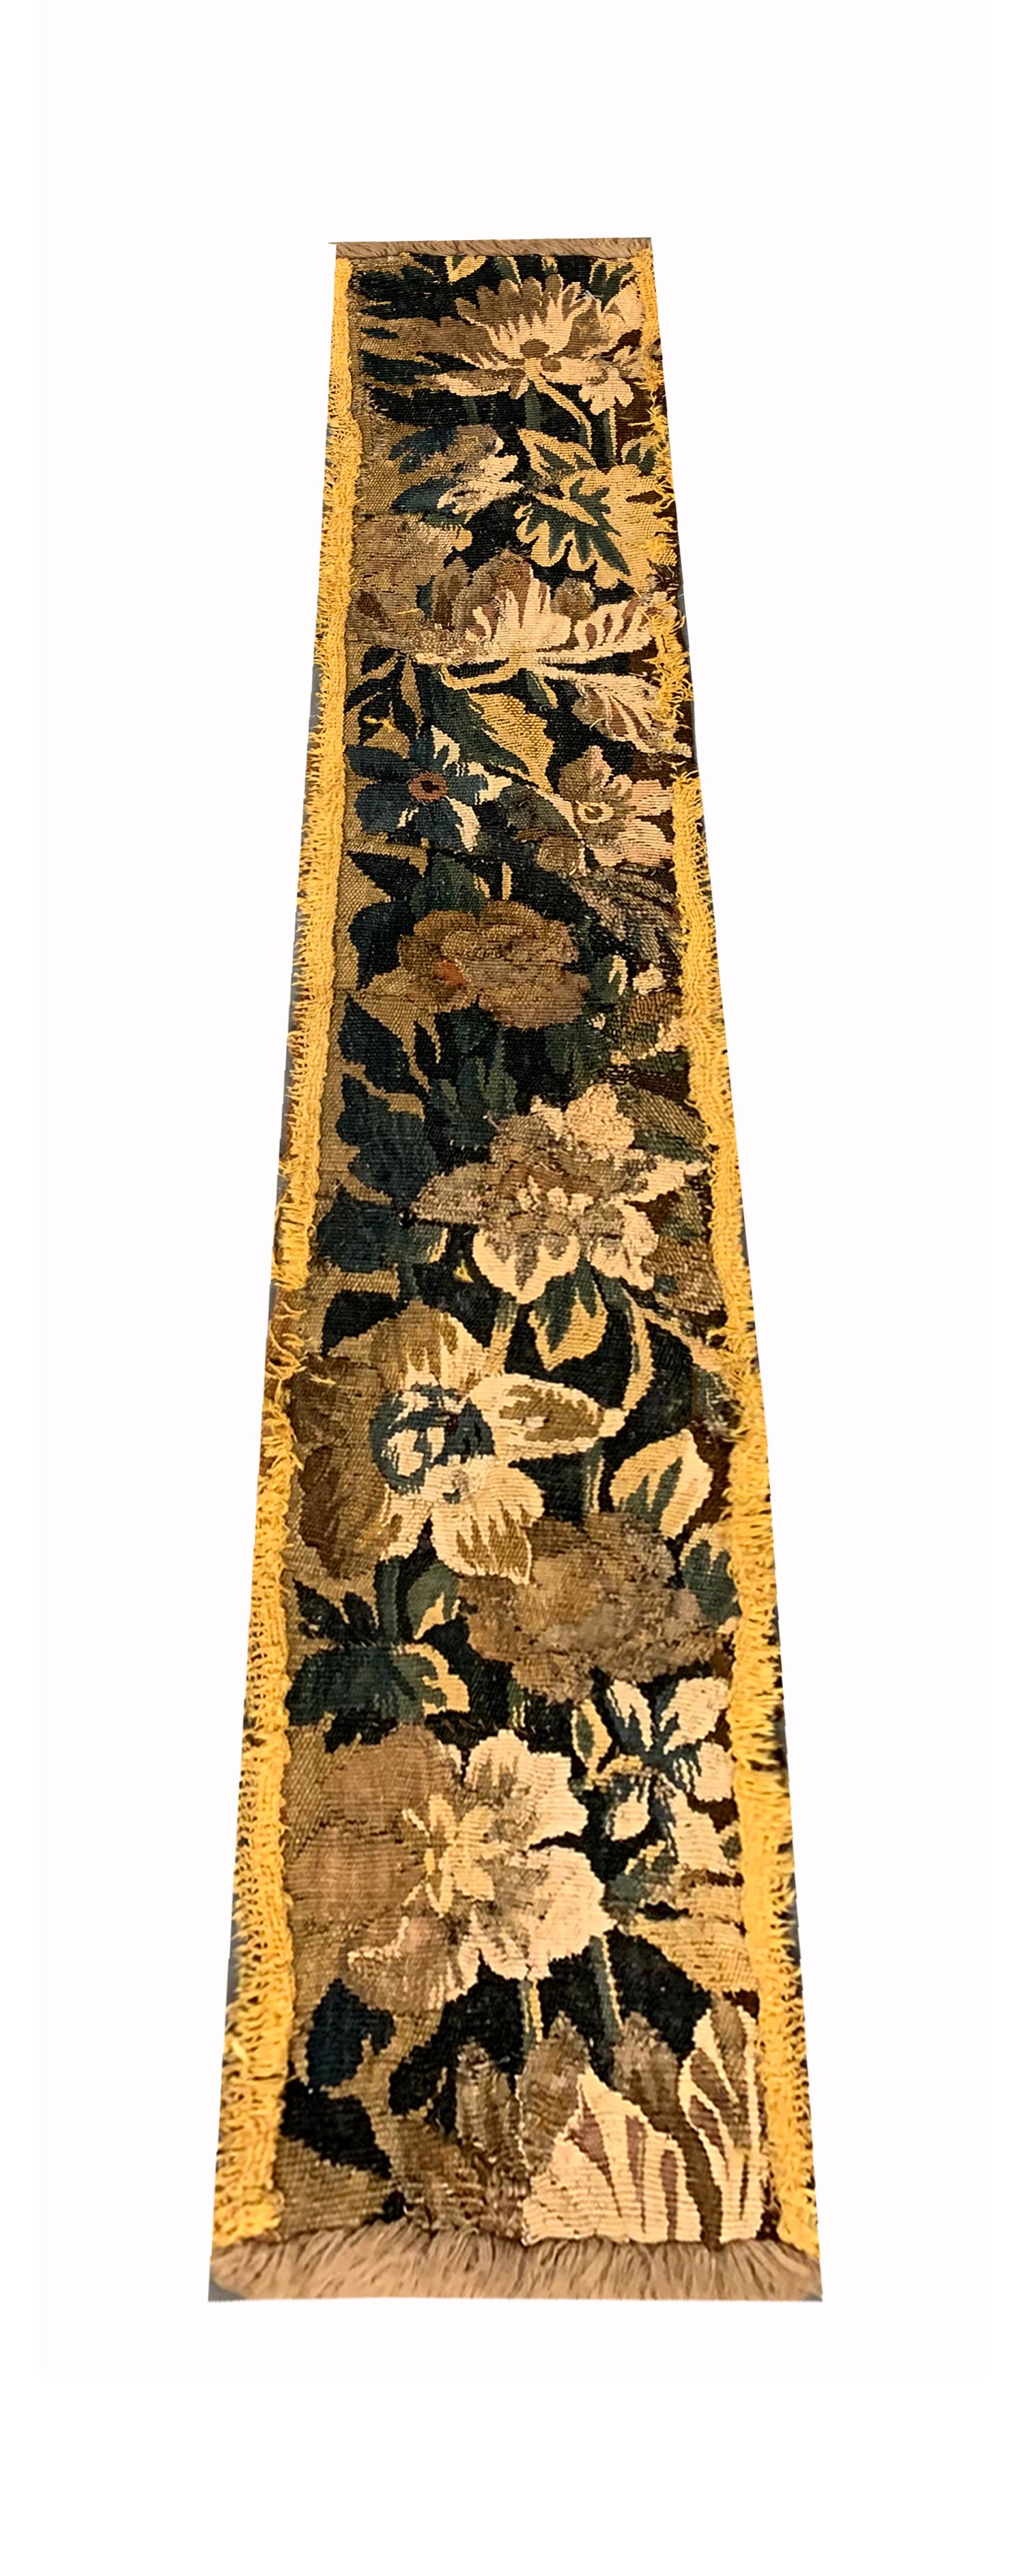 This antique tapestry piece is a Flemish needlepoint woven by hand in the late 19th century, circa 1890. The design features a bold flowing floral pattern woven with elegance and sophistication. Constructed with a subtle yet rich colour palette